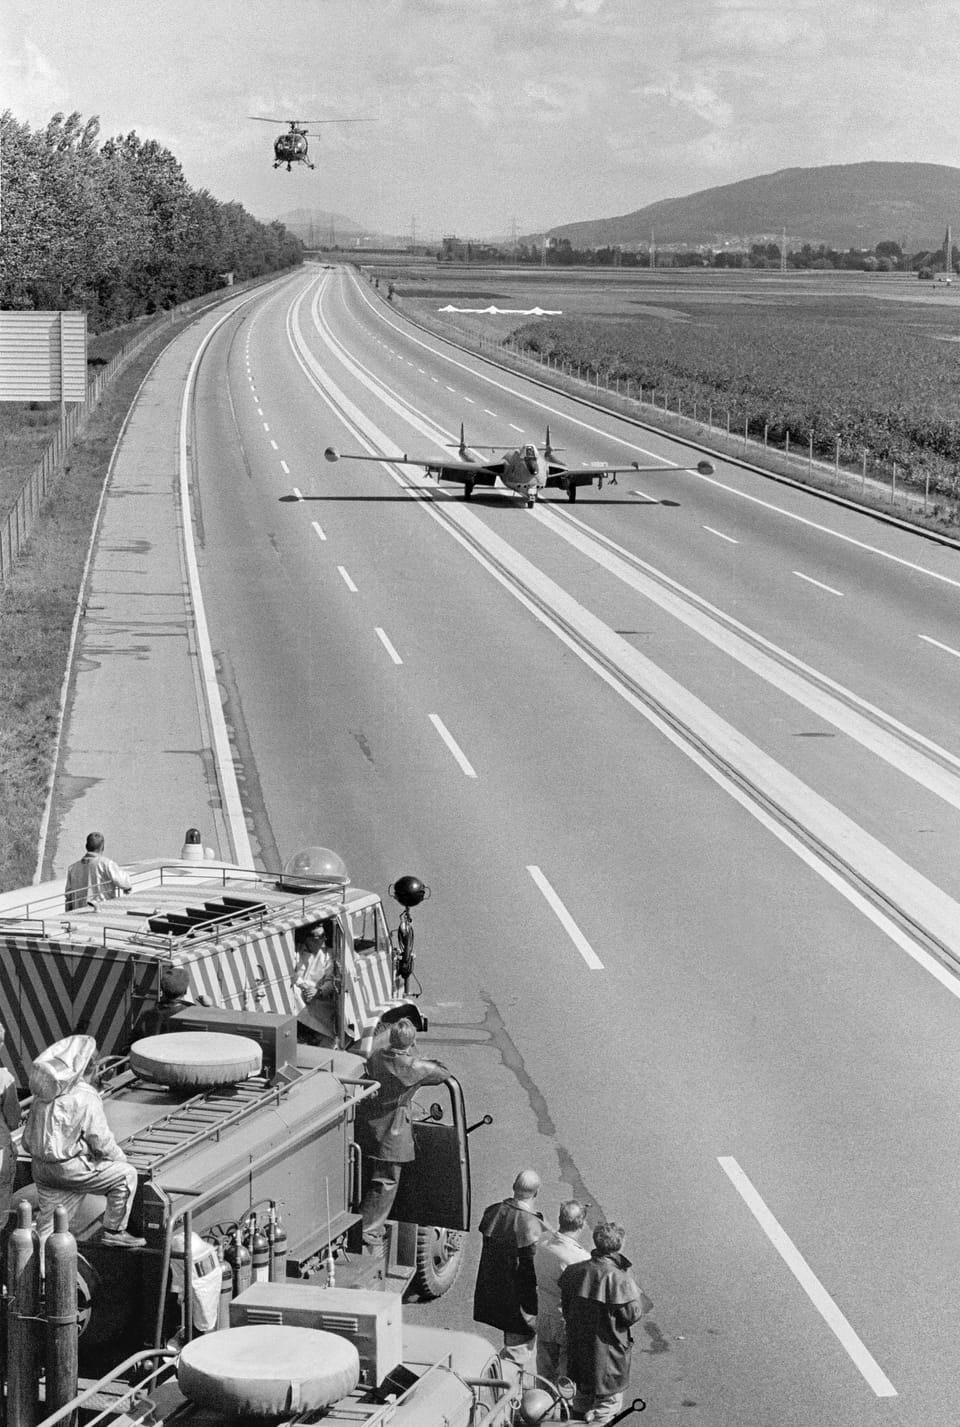 Military jet taxis on a stretch of highway;  vehicles are placed on the side of the road;  A helicopter circles above